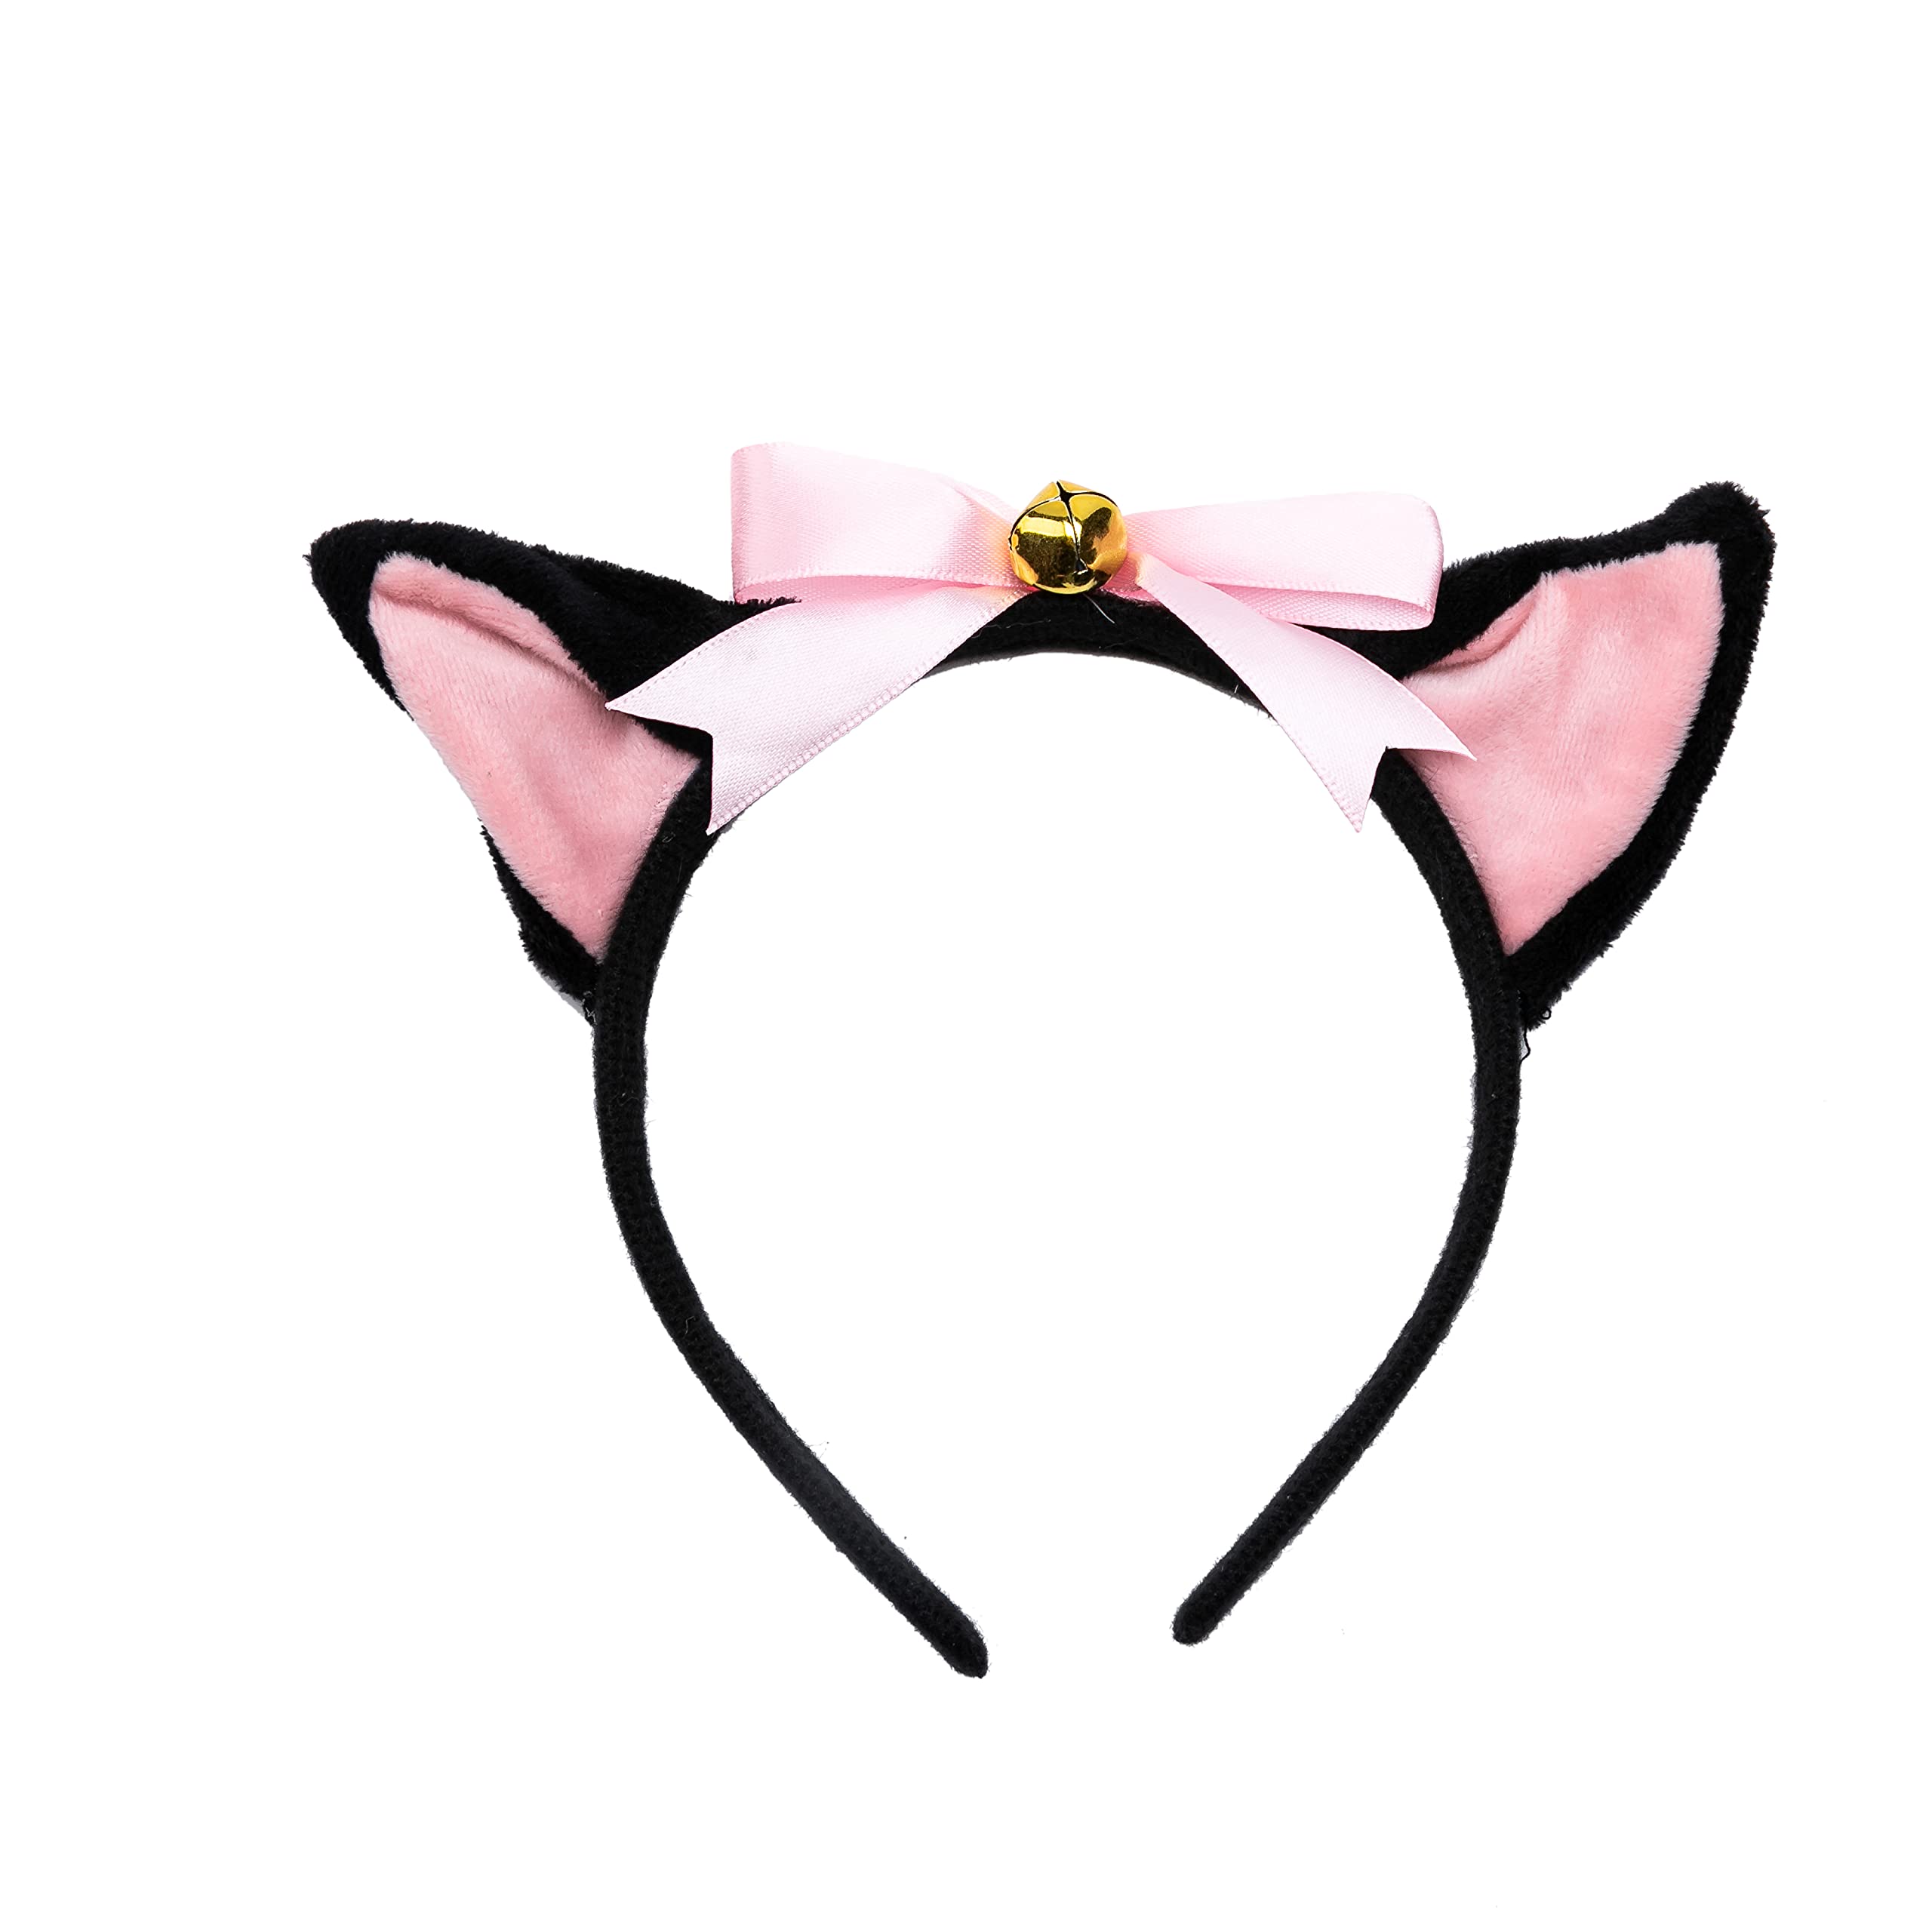 Spooktacular Creations Cute Cat Girl Cosplay Accessory Set, 6Pcs Cat Ears Headband and Paws Gloves for Halloween Dress Up, Cat Cosplay, Animal Pretend Play